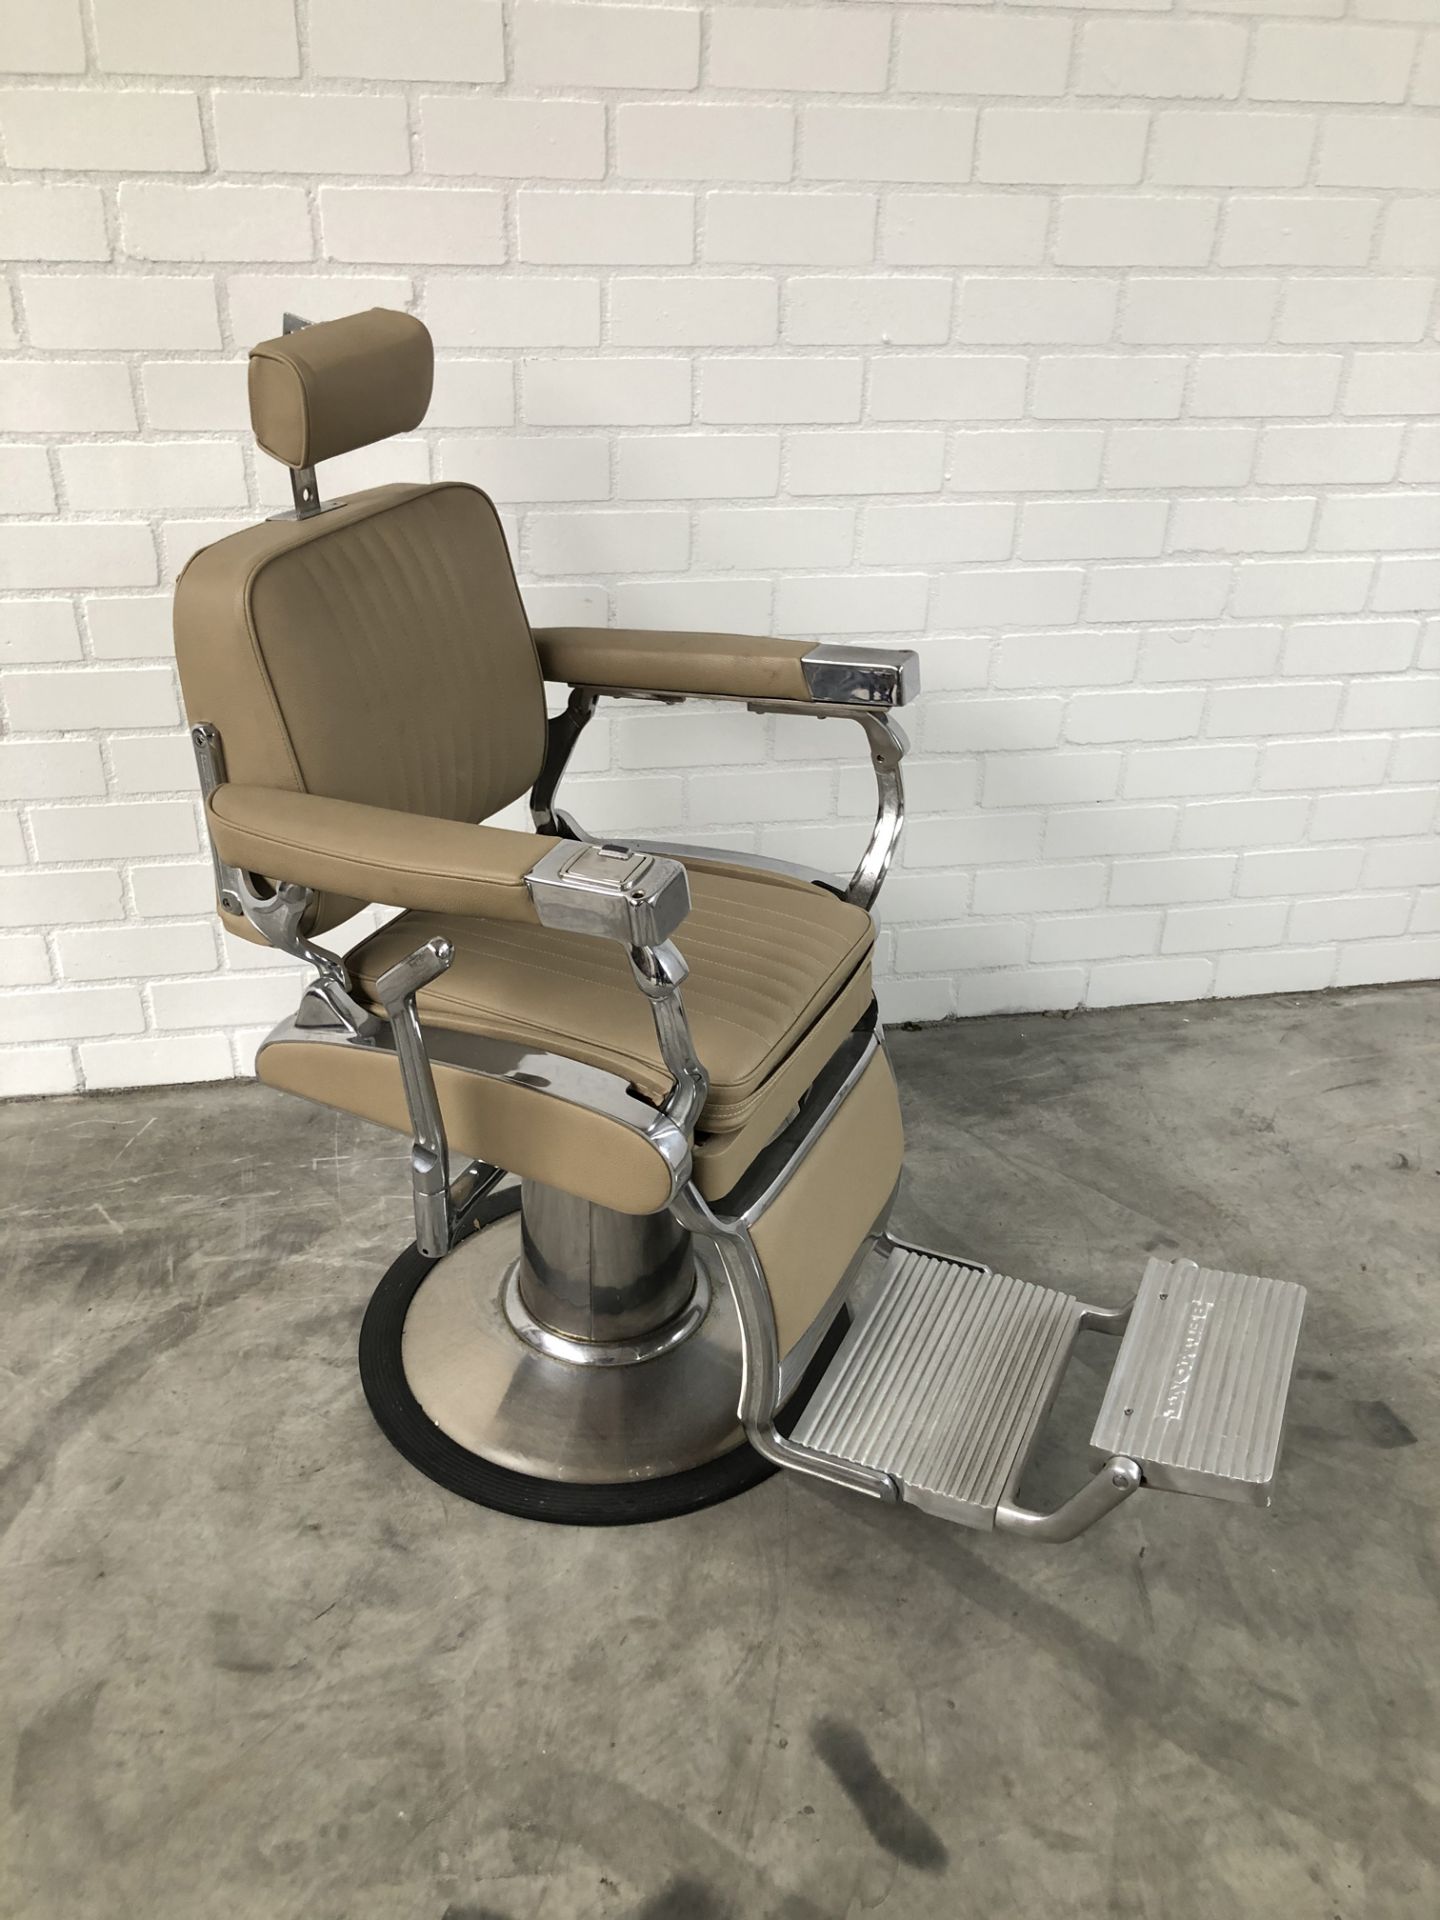 Completely Restored Original Barber Chair - Image 4 of 13